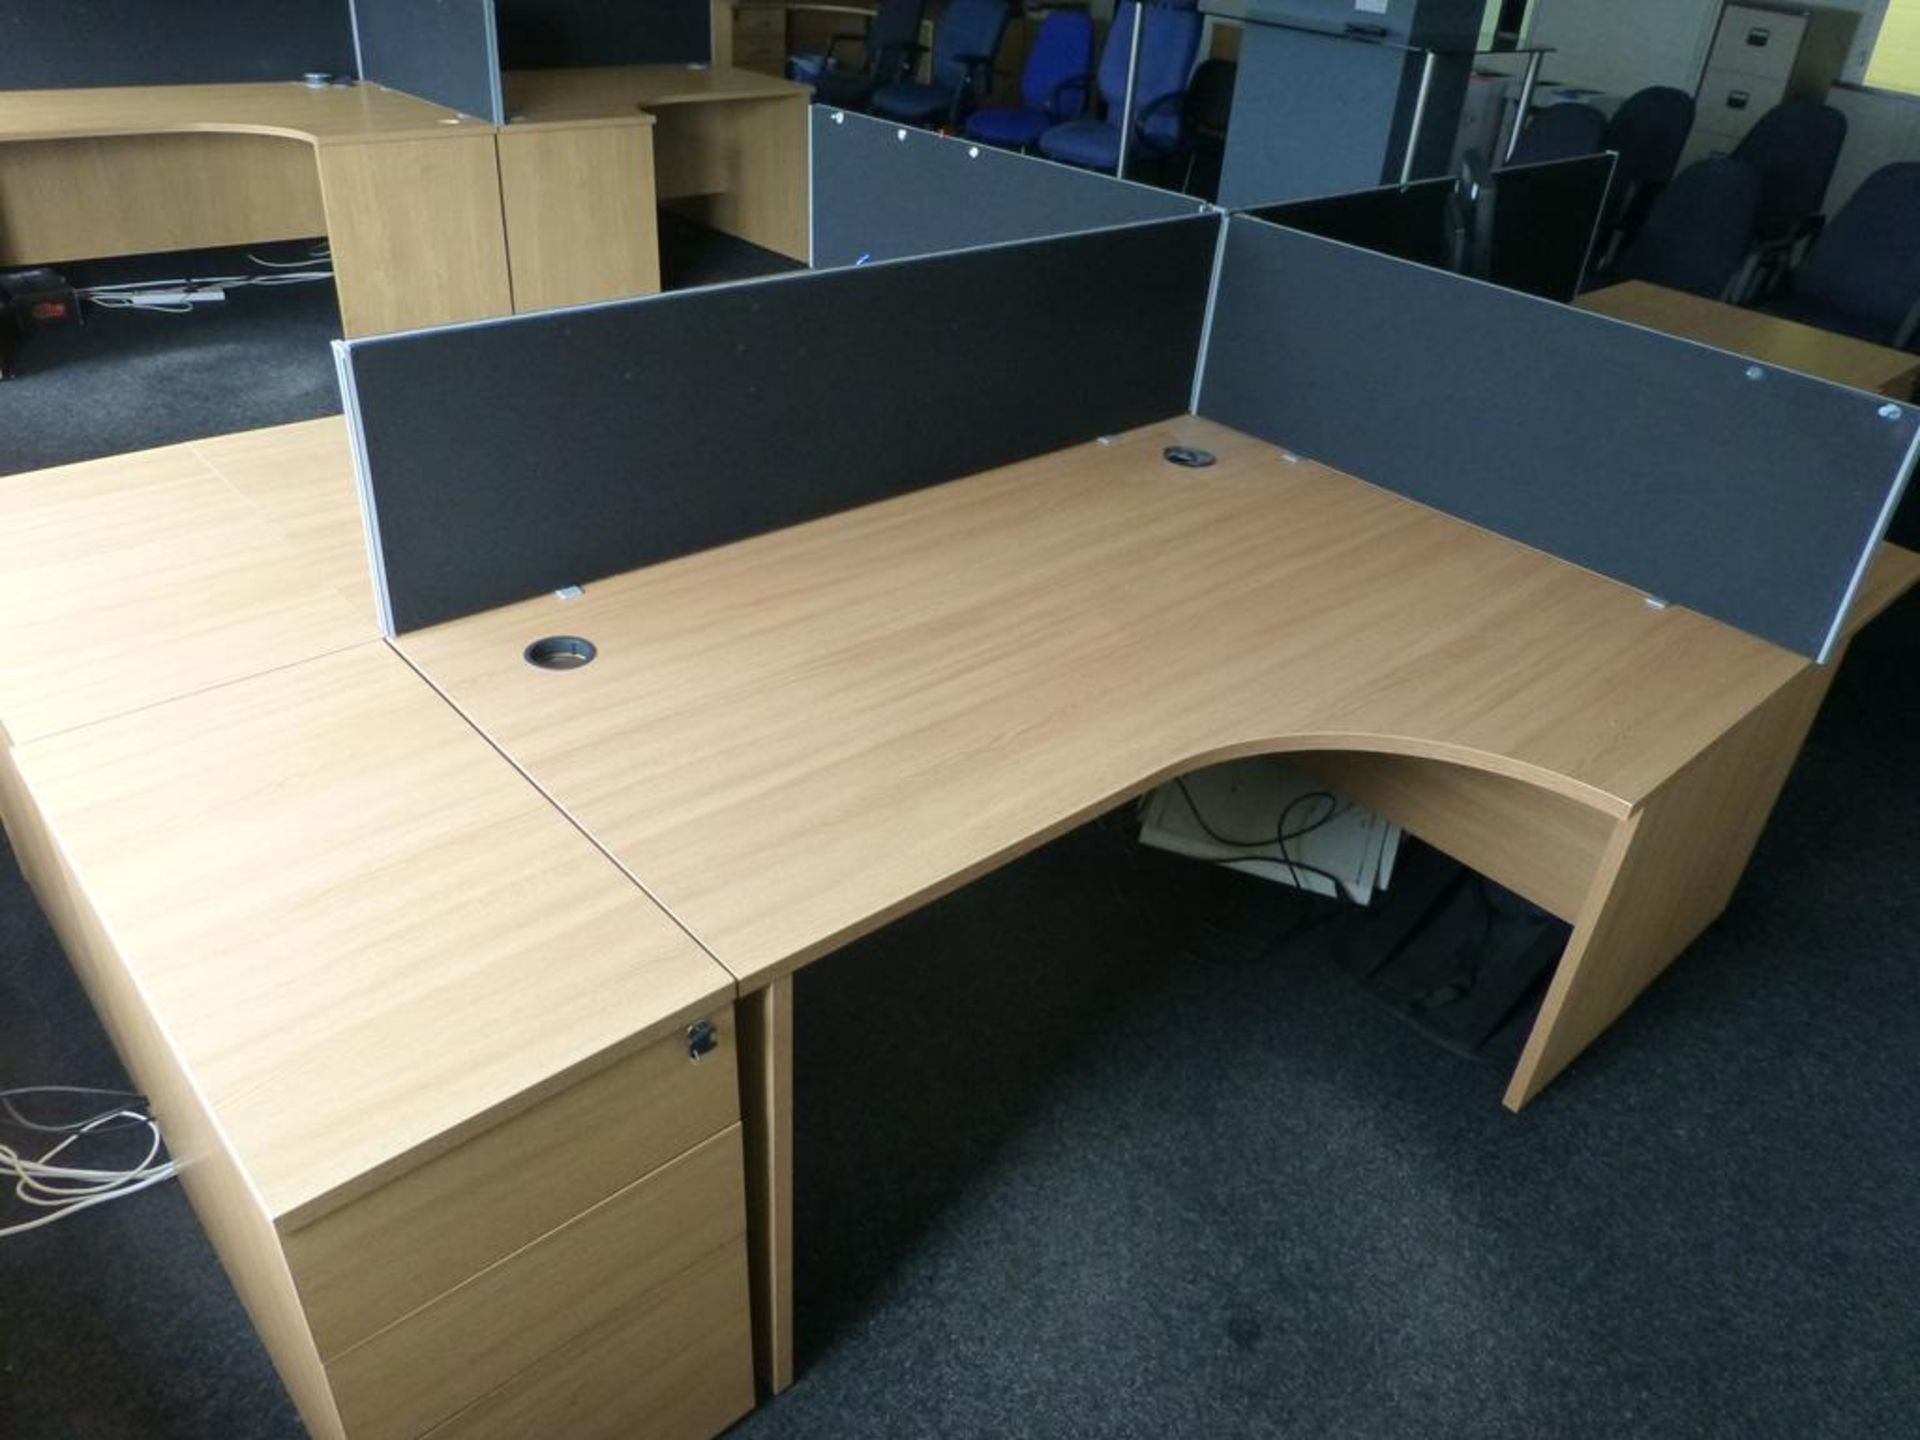 4 cherry effect 1600mm x 1200mm workstations with 3 matching 3 drawer pedestals and 4 x 400mm high - Image 3 of 3